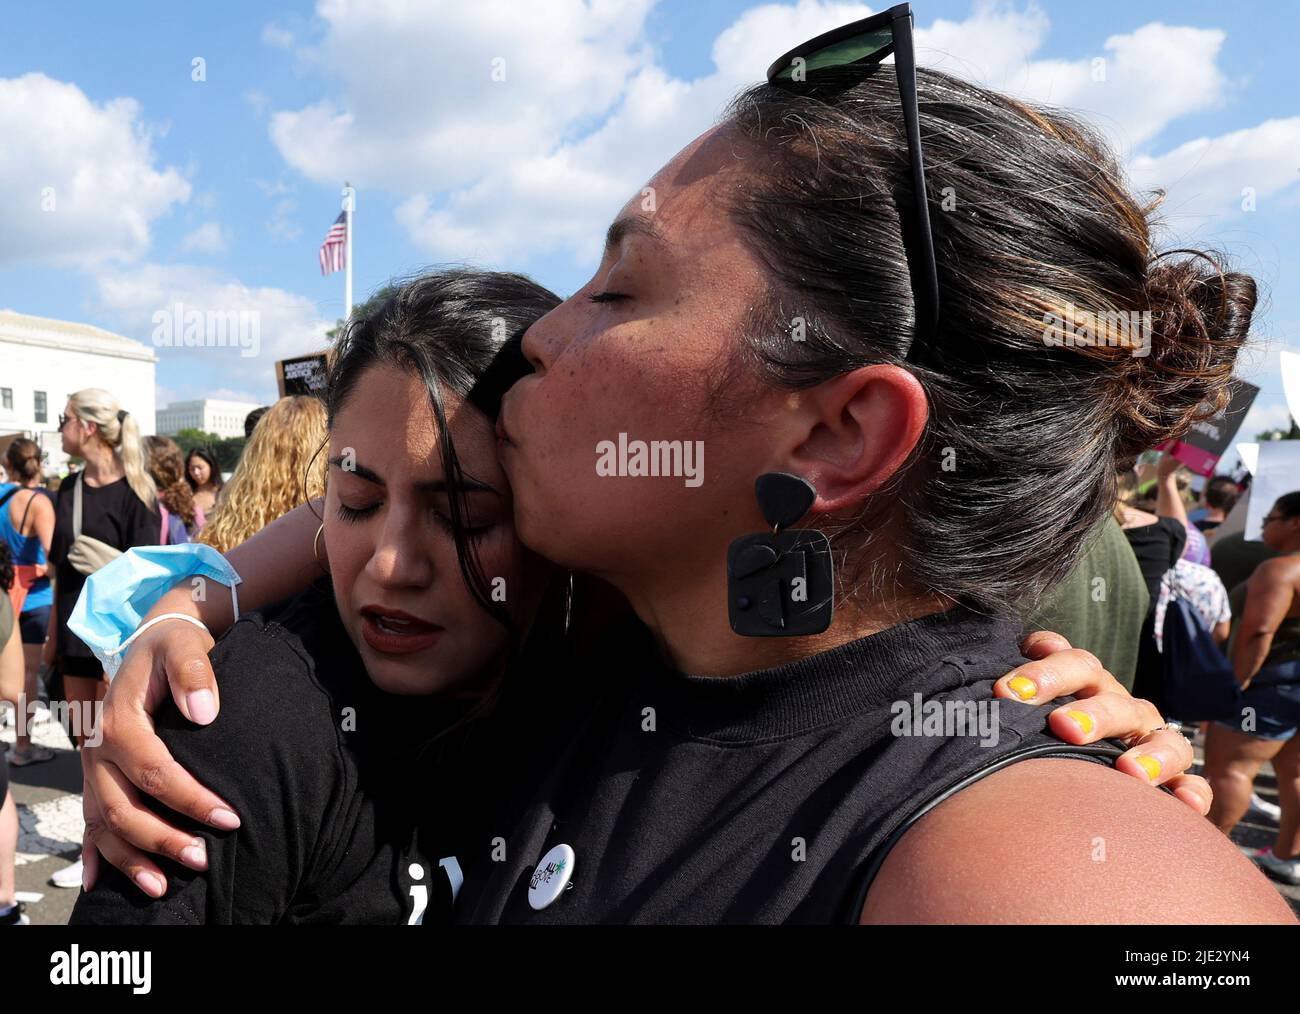 MJ Flores (L), a San Antonio Texas woman who had an abortion in Texas, cries while hugging Daniela Diaz (R), a friend from Venezuela who had an abortion in Washington, DC, during a protest outside the United States Supreme Court as the court rules in the Dobbs v Women's Health Organization abortion case, overturning the landmark Roe v Wade abortion decision, in Washington, DC, U.S., June 24, 2022. REUTERS/Jim Bourg Stock Photo